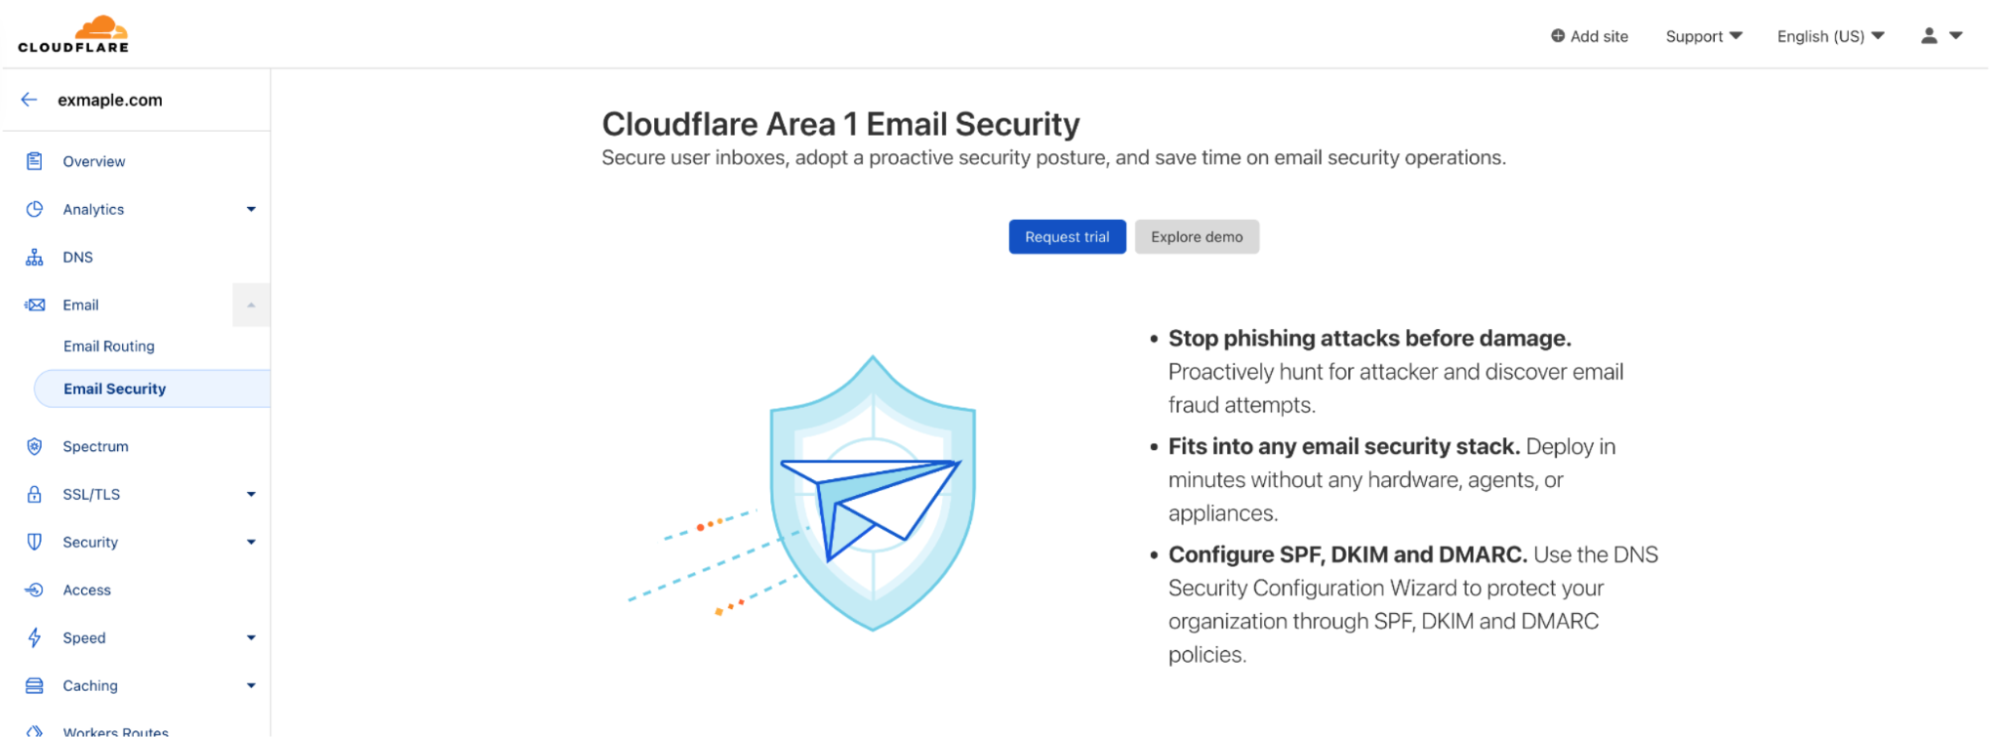 Cloudflare Area 1 - how the best Email Security keeps getting better